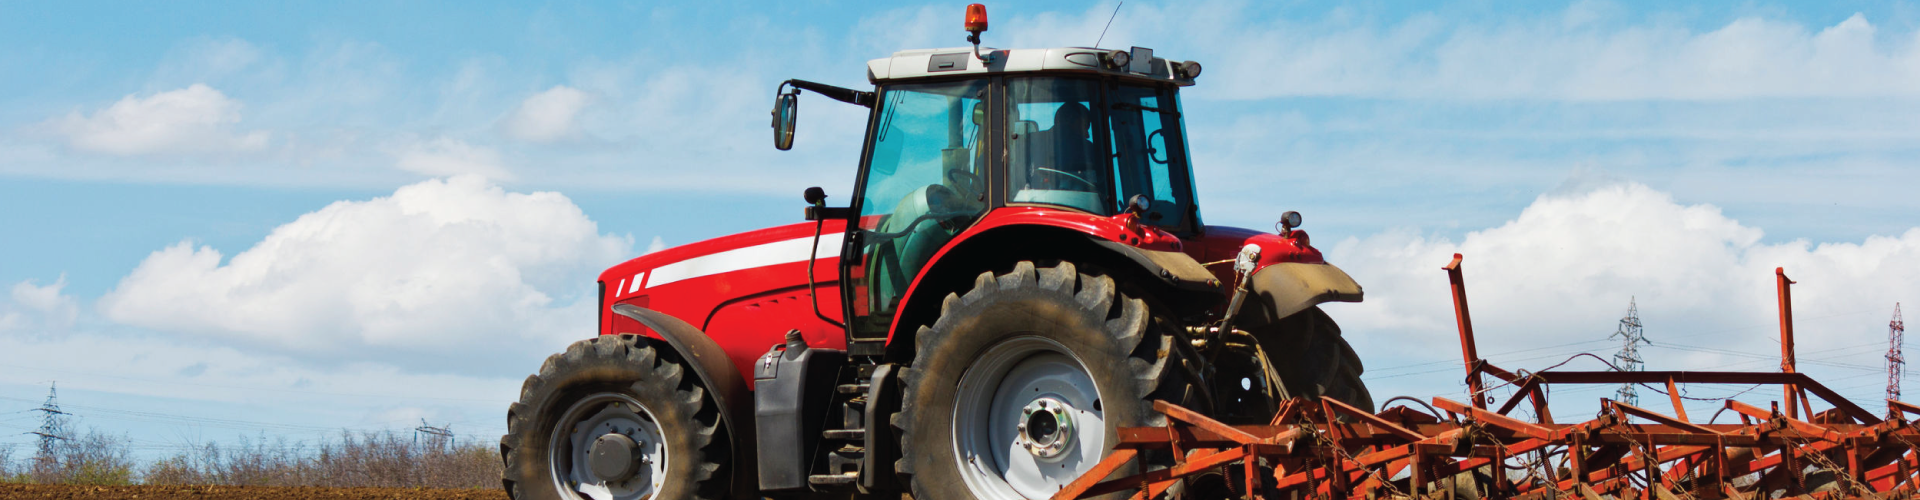 Farm Equipment and Their Uses